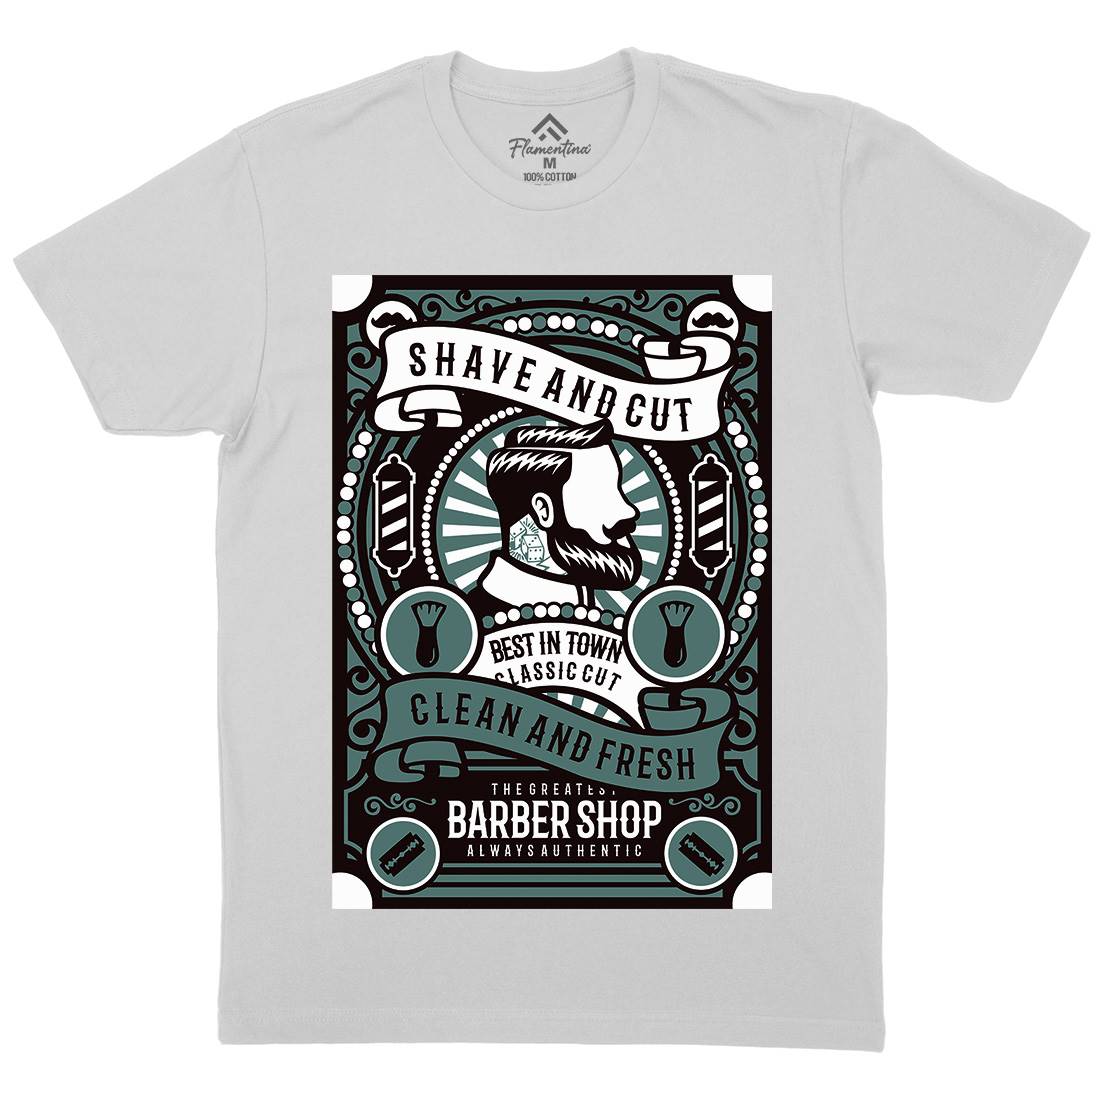 Shave And Cut Mens Crew Neck T-Shirt Barber B254